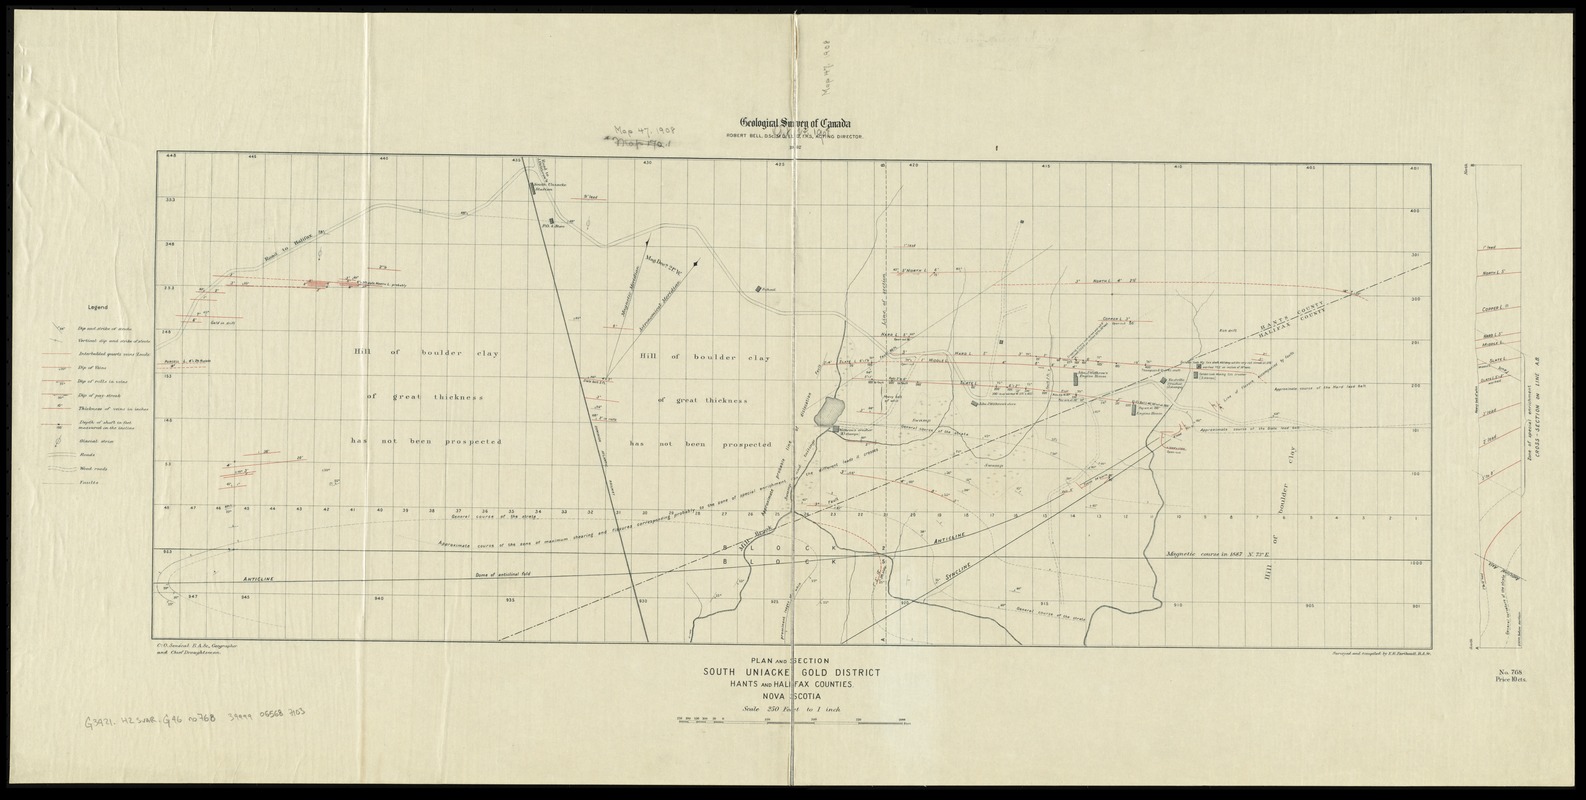 Plan and section, South Uniacke gold district, Hants and Halifax Counties, Nova Scotia